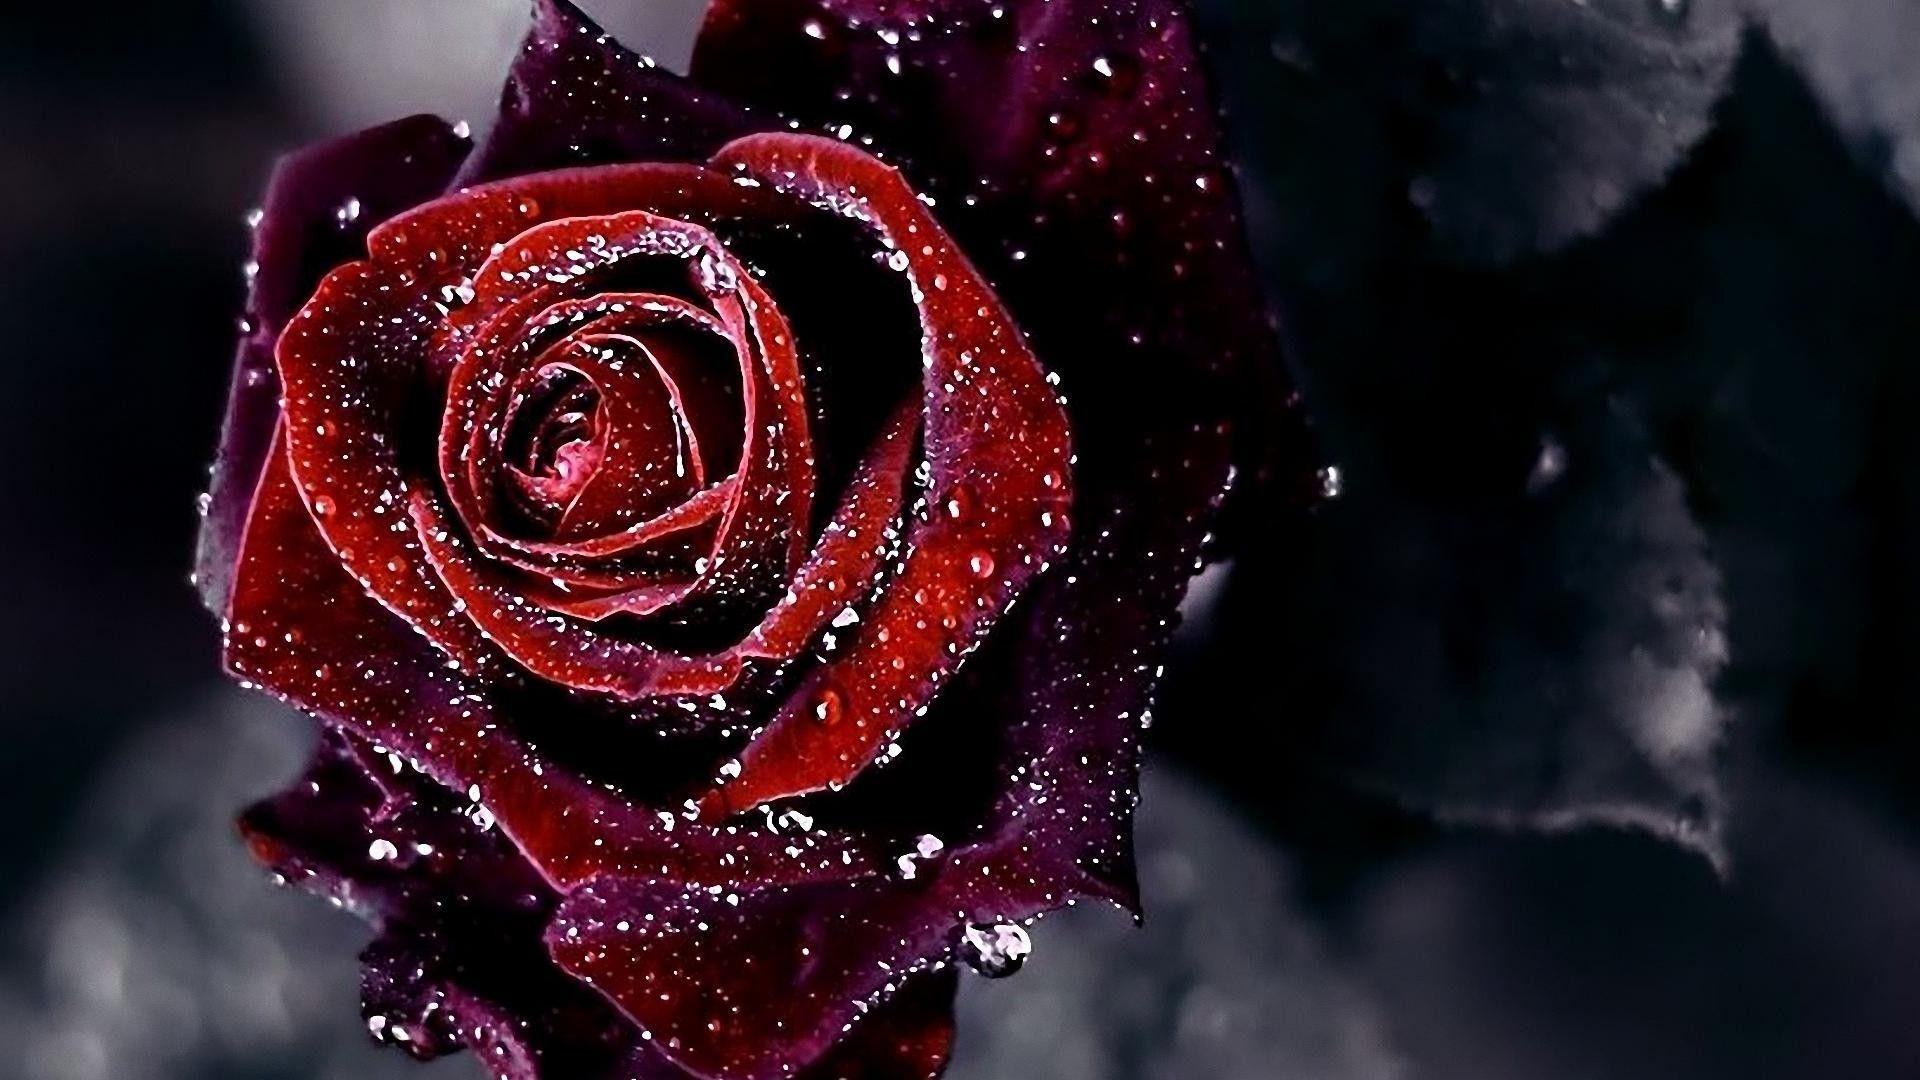 Black And Red Roses Wallpaper